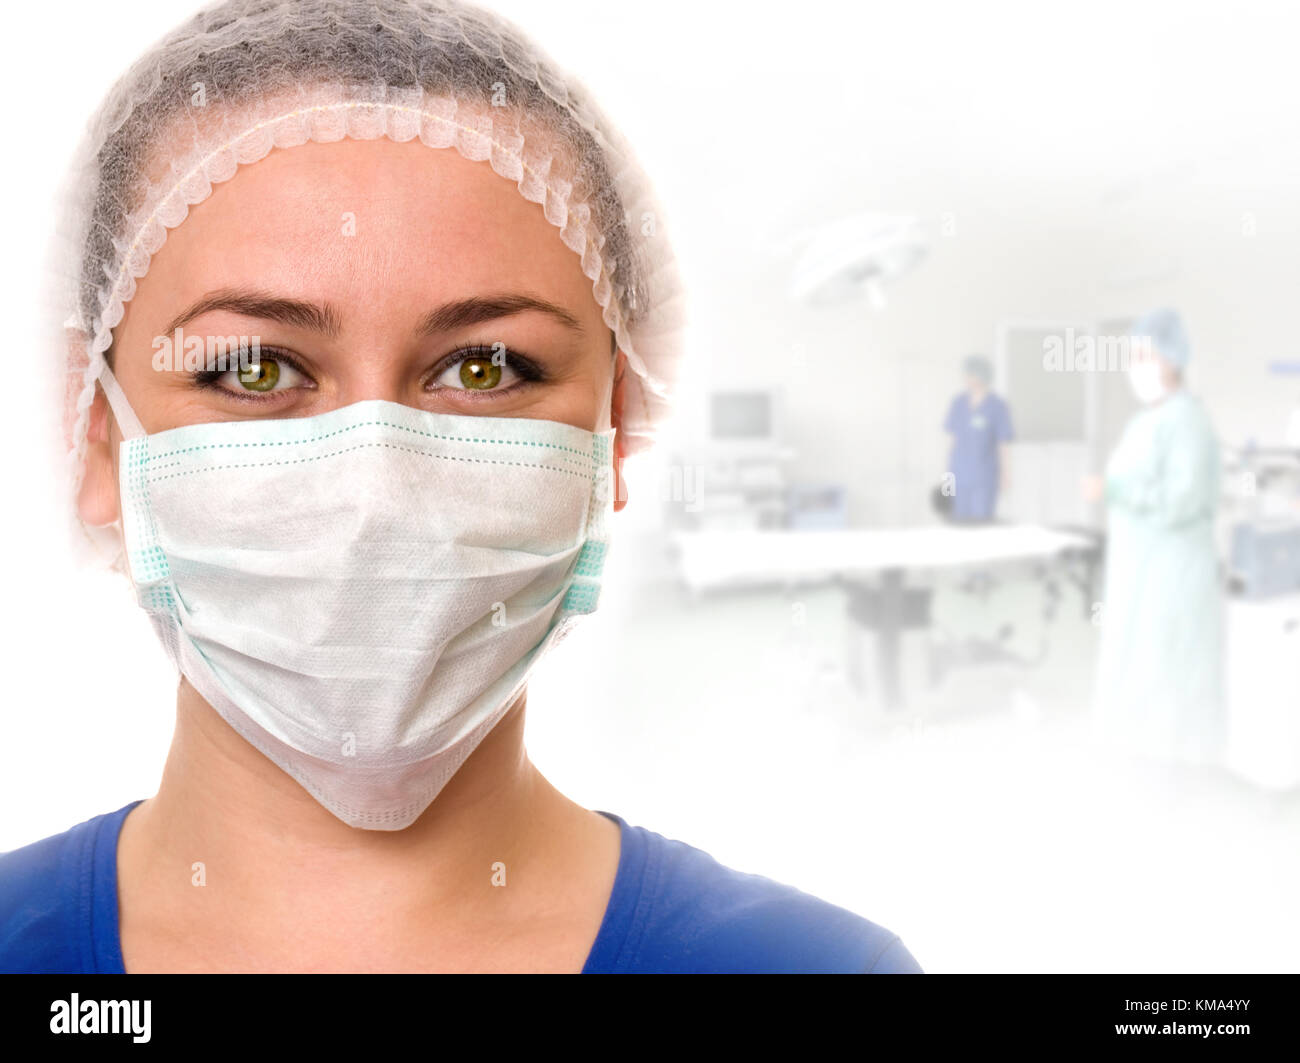 A portrait of a medical assistant while an operation takes place in the background. Stock Photo